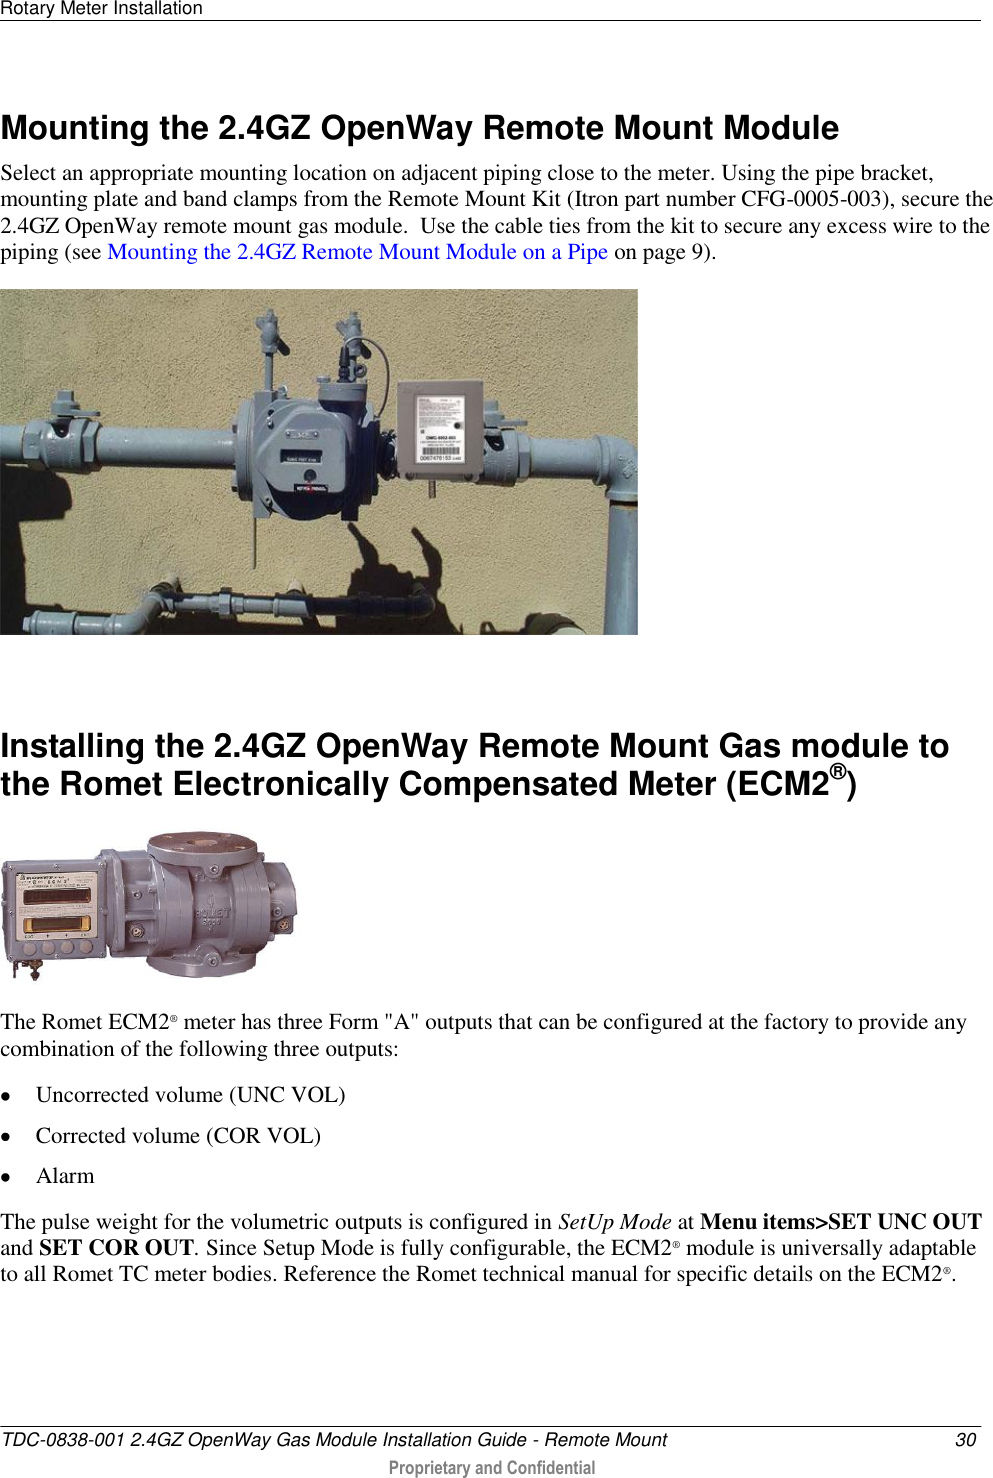 Rotary Meter Installation   TDC-0838-001 2.4GZ OpenWay Gas Module Installation Guide - Remote Mount  30  Proprietary and Confidential    Mounting the 2.4GZ OpenWay Remote Mount Module Select an appropriate mounting location on adjacent piping close to the meter. Using the pipe bracket, mounting plate and band clamps from the Remote Mount Kit (Itron part number CFG-0005-003), secure the 2.4GZ OpenWay remote mount gas module.  Use the cable ties from the kit to secure any excess wire to the piping (see Mounting the 2.4GZ Remote Mount Module on a Pipe on page 9).    Installing the 2.4GZ OpenWay Remote Mount Gas module to the Romet Electronically Compensated Meter (ECM2®)  The Romet ECM2® meter has three Form &quot;A&quot; outputs that can be configured at the factory to provide any combination of the following three outputs:  Uncorrected volume (UNC VOL)  Corrected volume (COR VOL)  Alarm The pulse weight for the volumetric outputs is configured in SetUp Mode at Menu items&gt;SET UNC OUT and SET COR OUT. Since Setup Mode is fully configurable, the ECM2® module is universally adaptable to all Romet TC meter bodies. Reference the Romet technical manual for specific details on the ECM2®.    